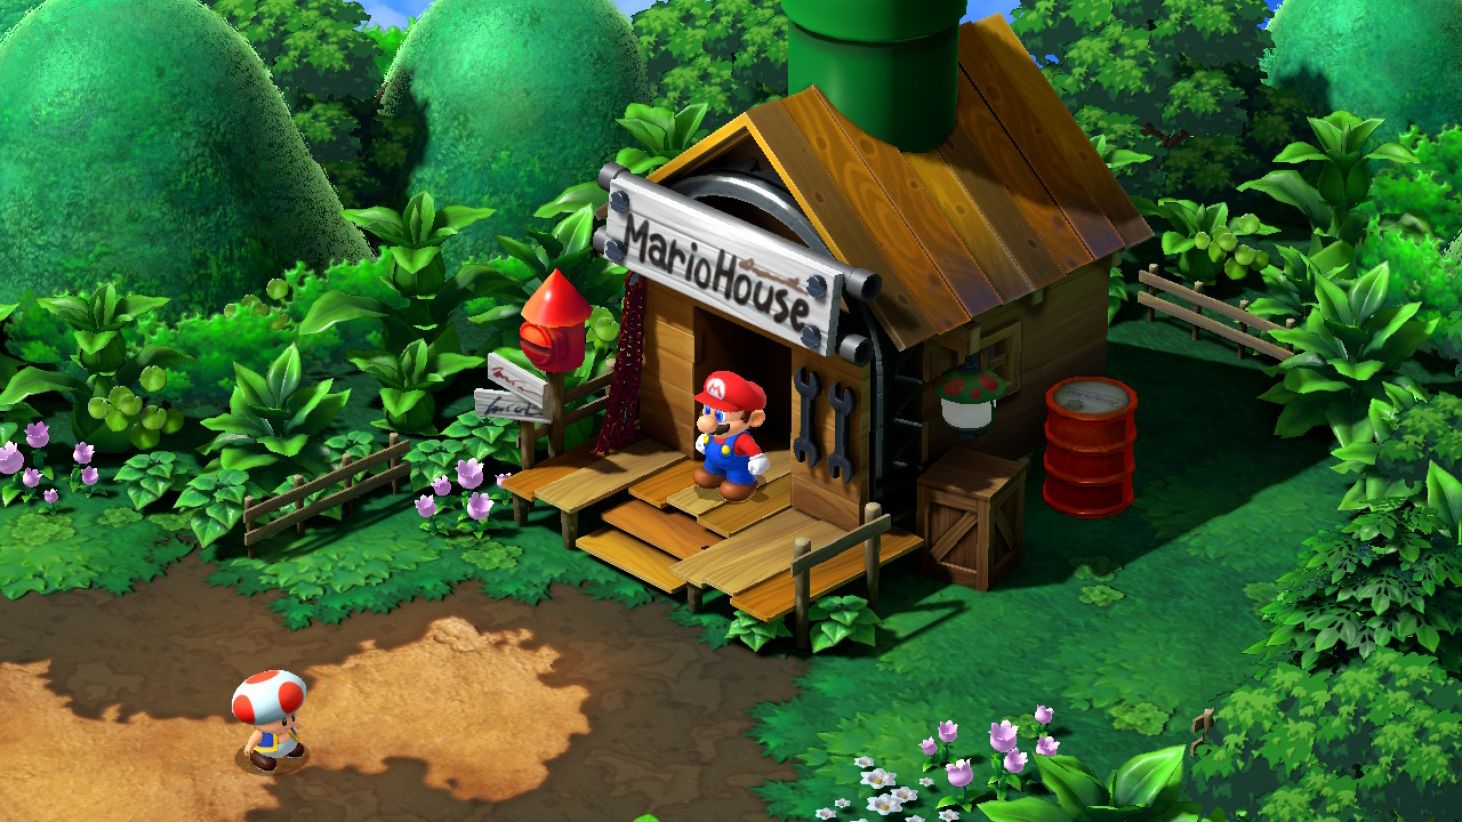 Talk To Toad Super Mario Rpg Walkthrough And Guide 0938